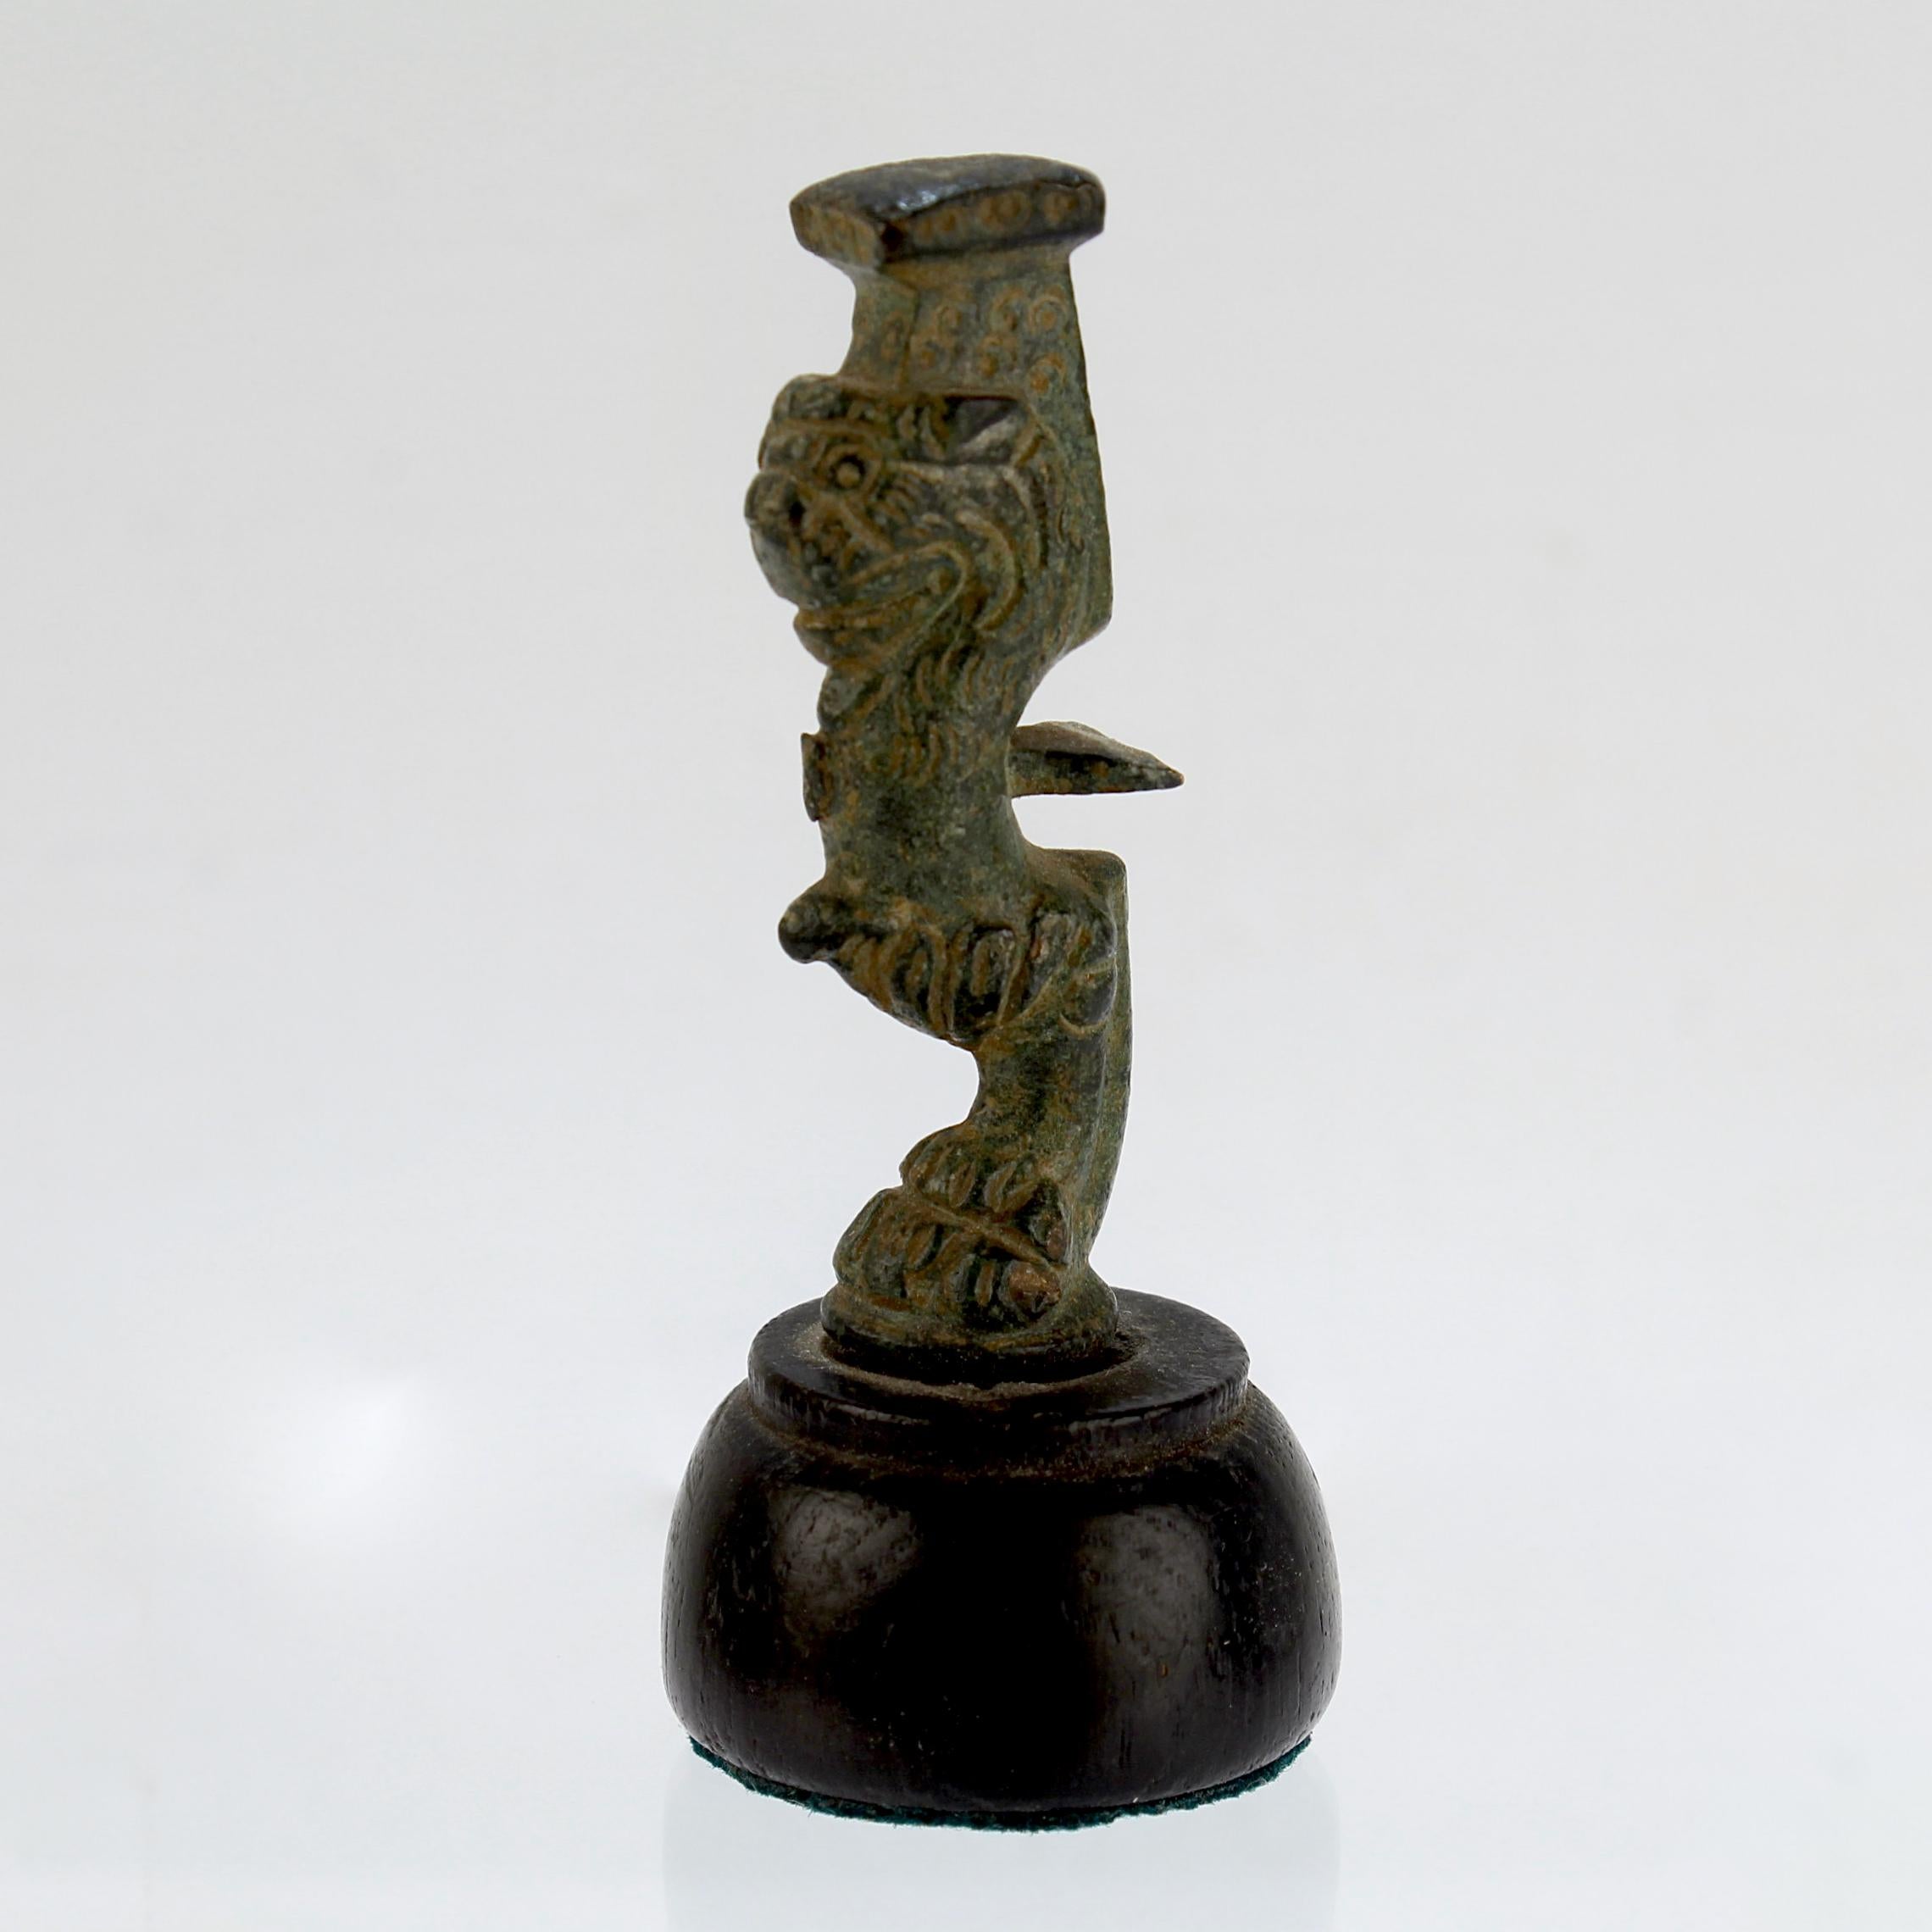 A fine Ancient Roman bronze element. 

It appears to be a leg or support for a larger structure.

The leg has a hoofed foot that supports a lion's head and square platform above. The leg is reminiscent of legs on Roman braziers.

Very finely